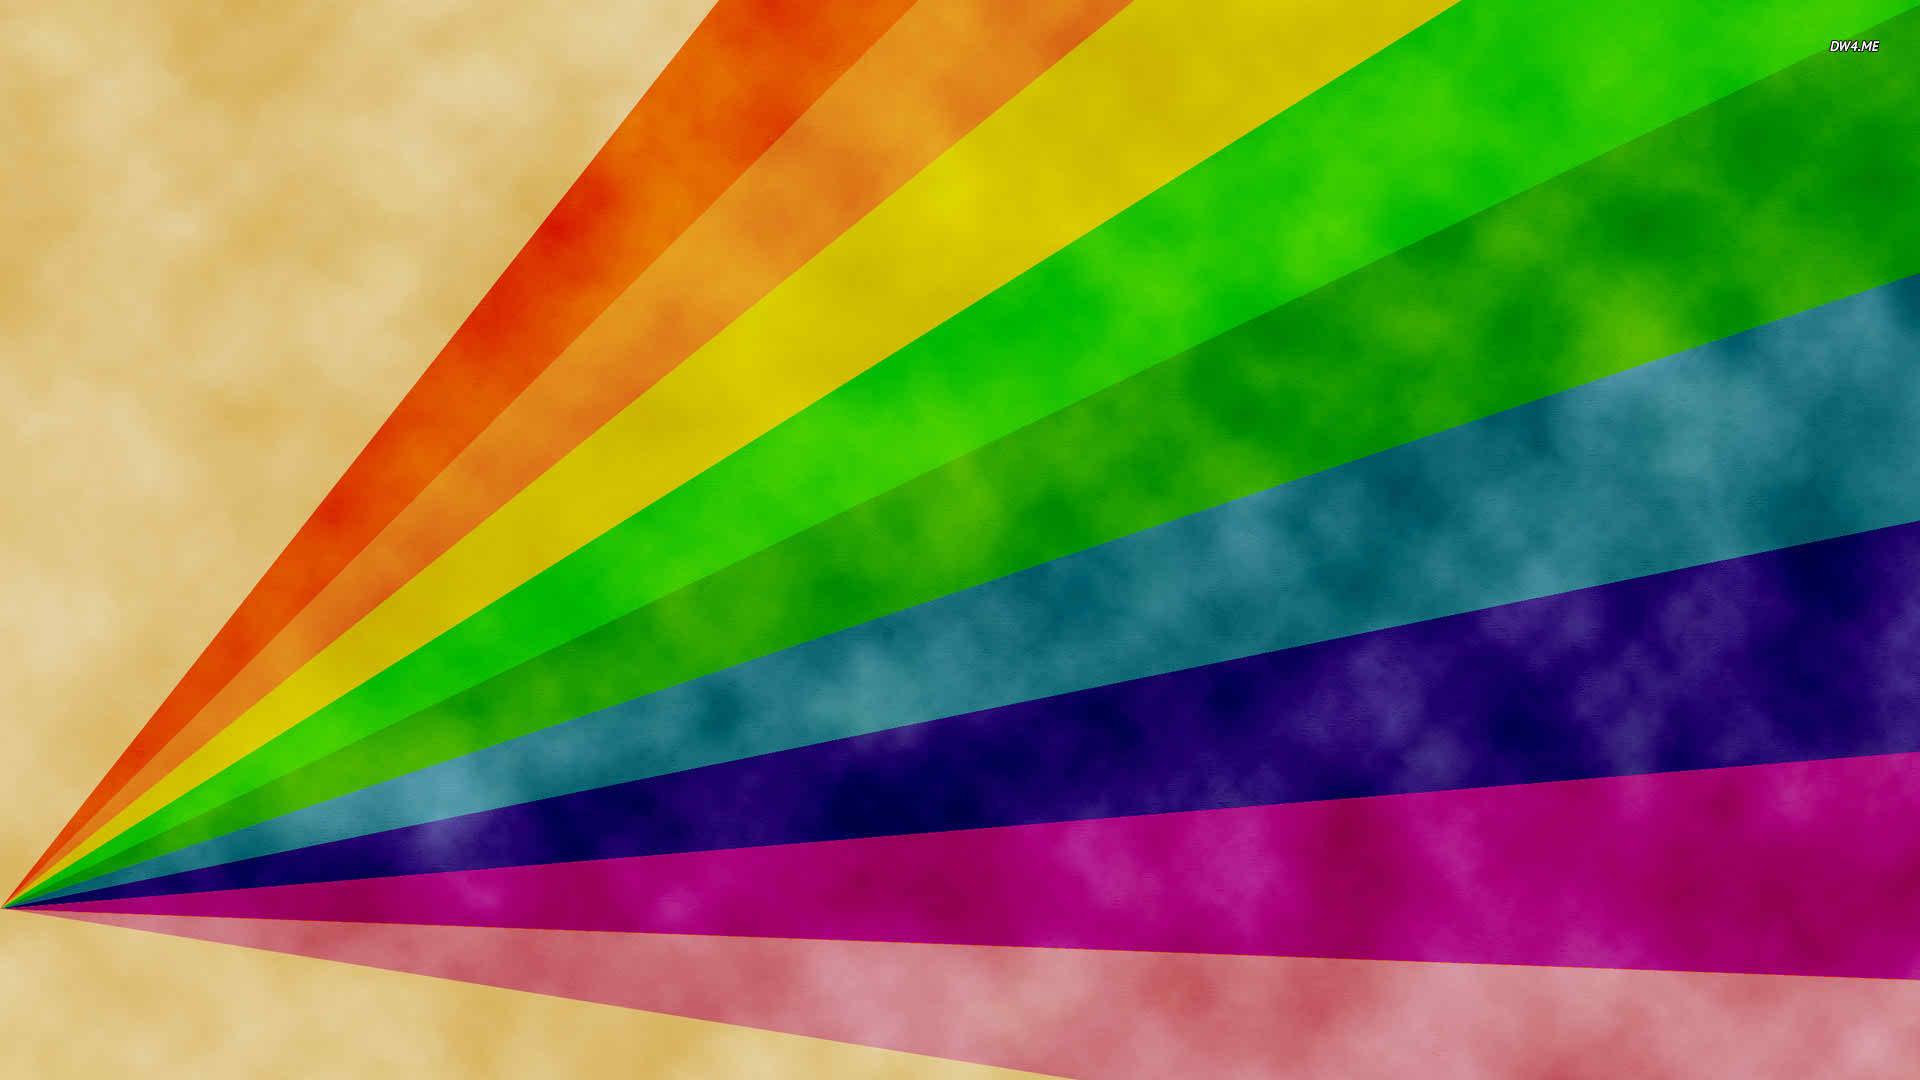 Rainbow Wallpaper, Download picture of a awesome HD rainbow